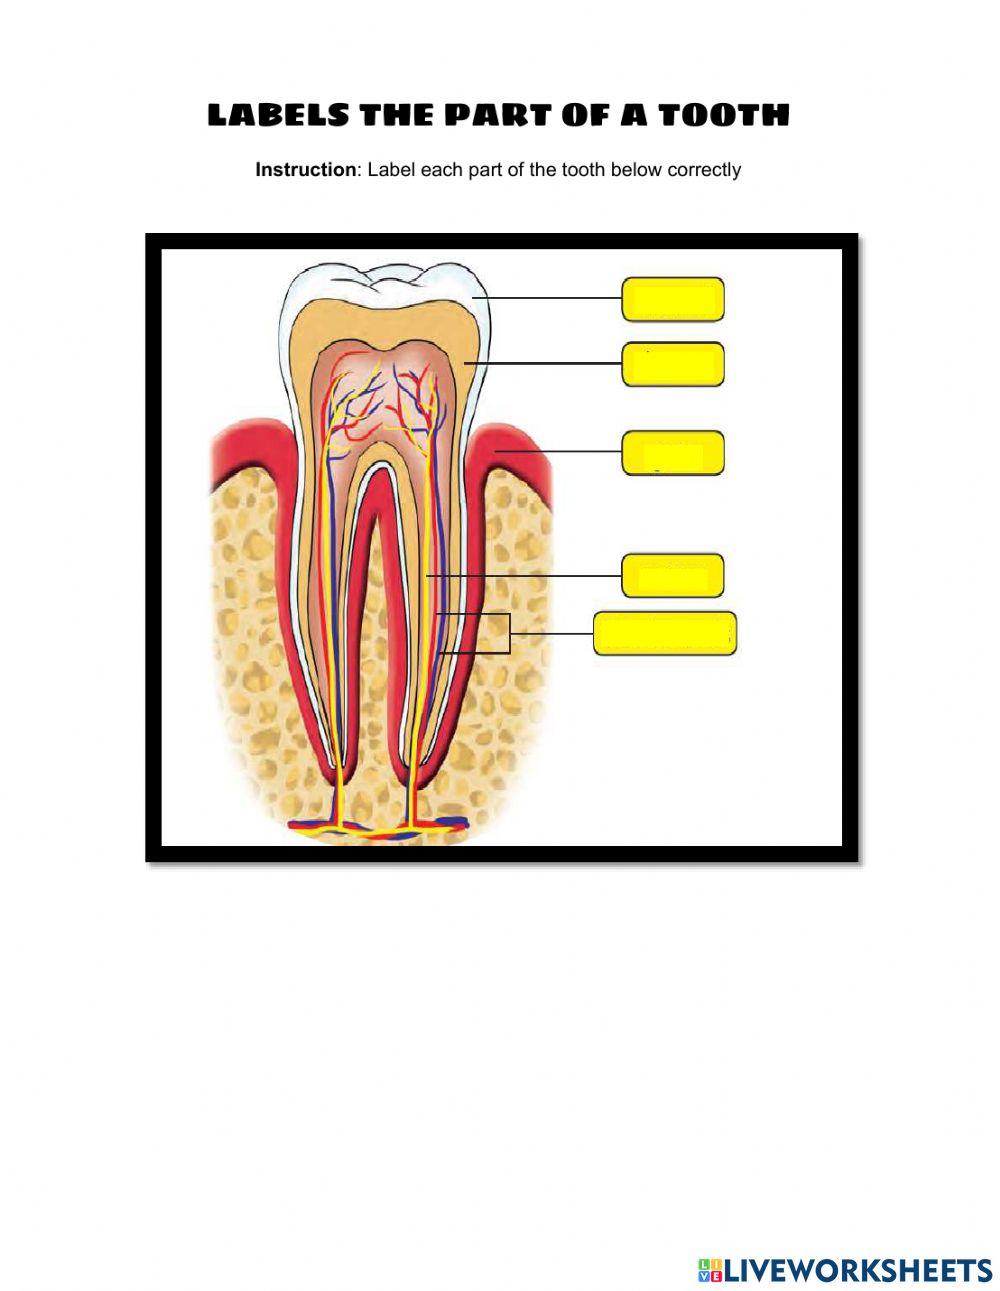 Structure of tooth